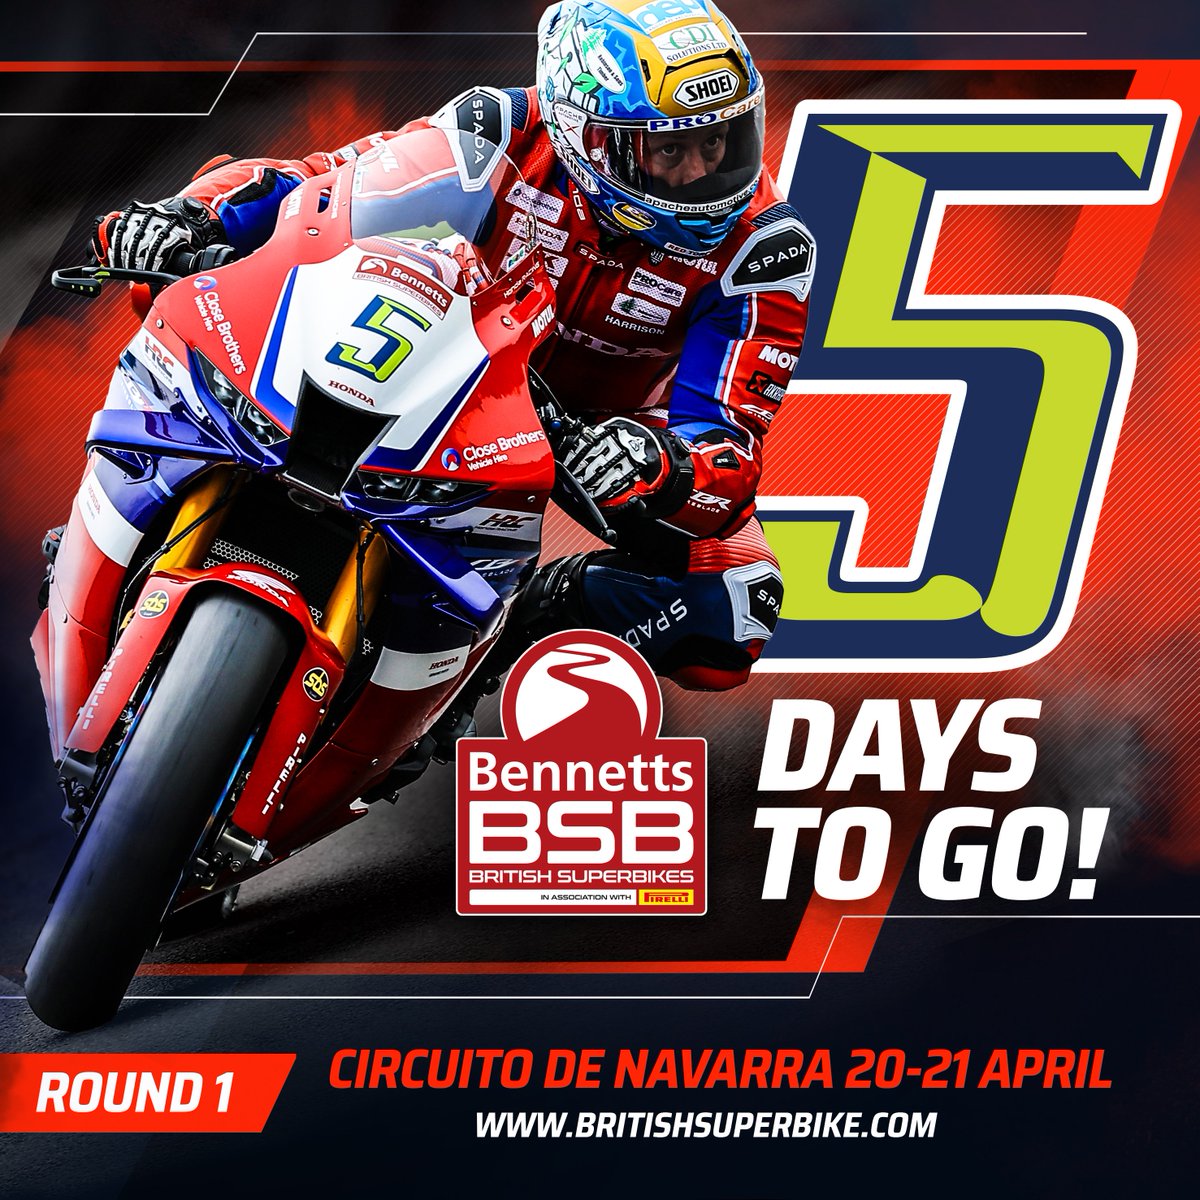 The final countdown to the @bennetts_bike BSB season opener! 5 days until the opening round @deanharrisonTT | @hondaracinguk Ticket information for our UK fans travelling to @CircuitoNavarra ➡️ bit.ly/3O6wt6E #NavarraBSB